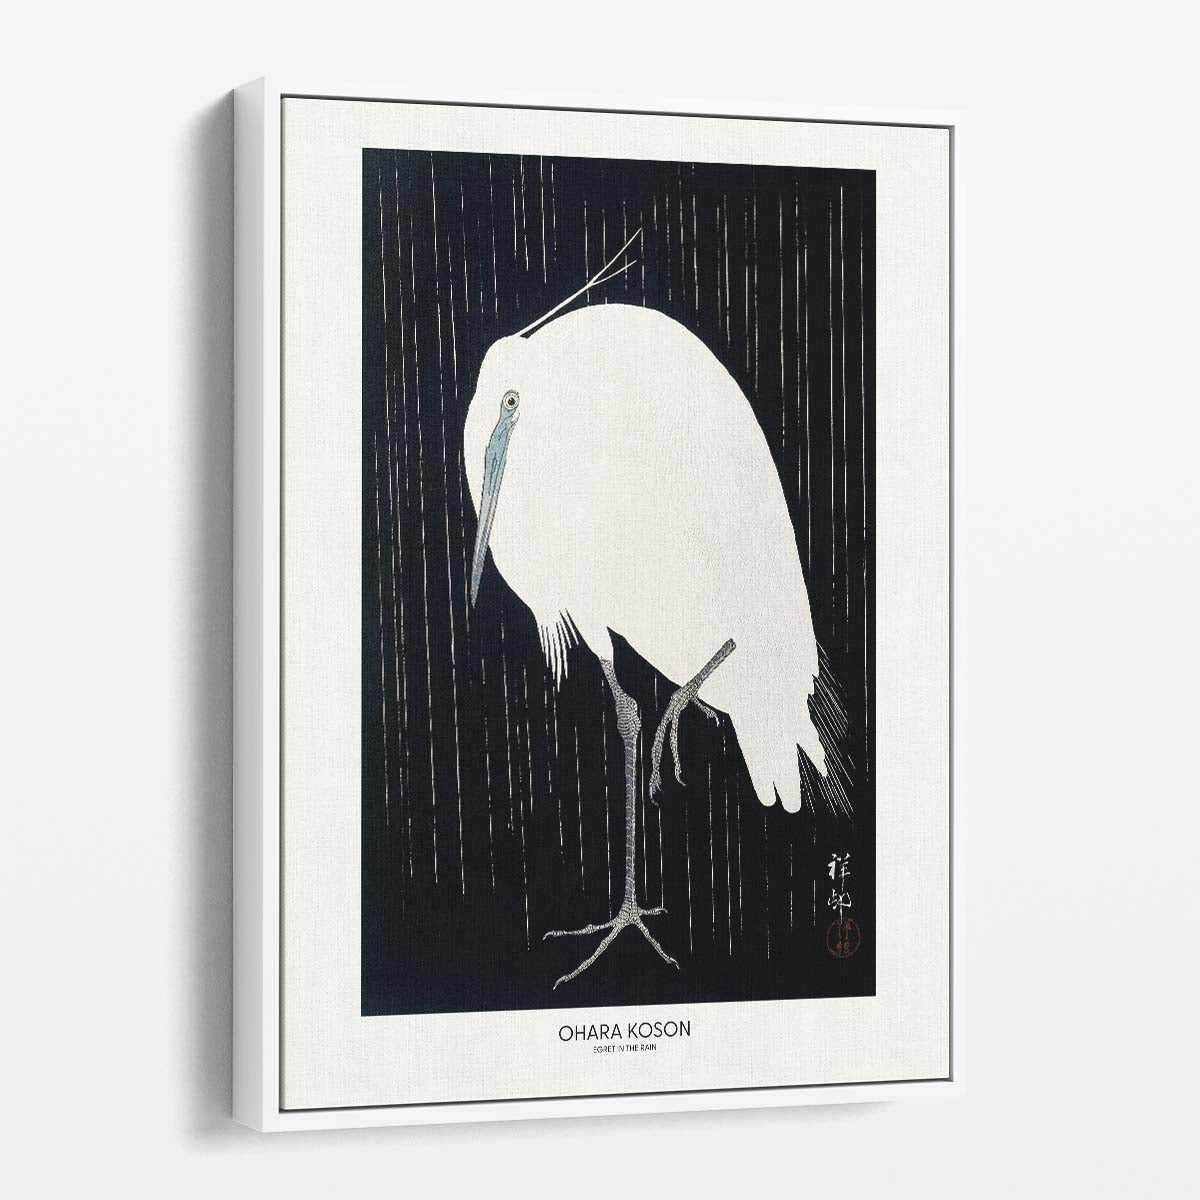 Vintage Japanese Egret Illustration in Rain by Ohara Koson Poster by Luxuriance Designs, made in USA